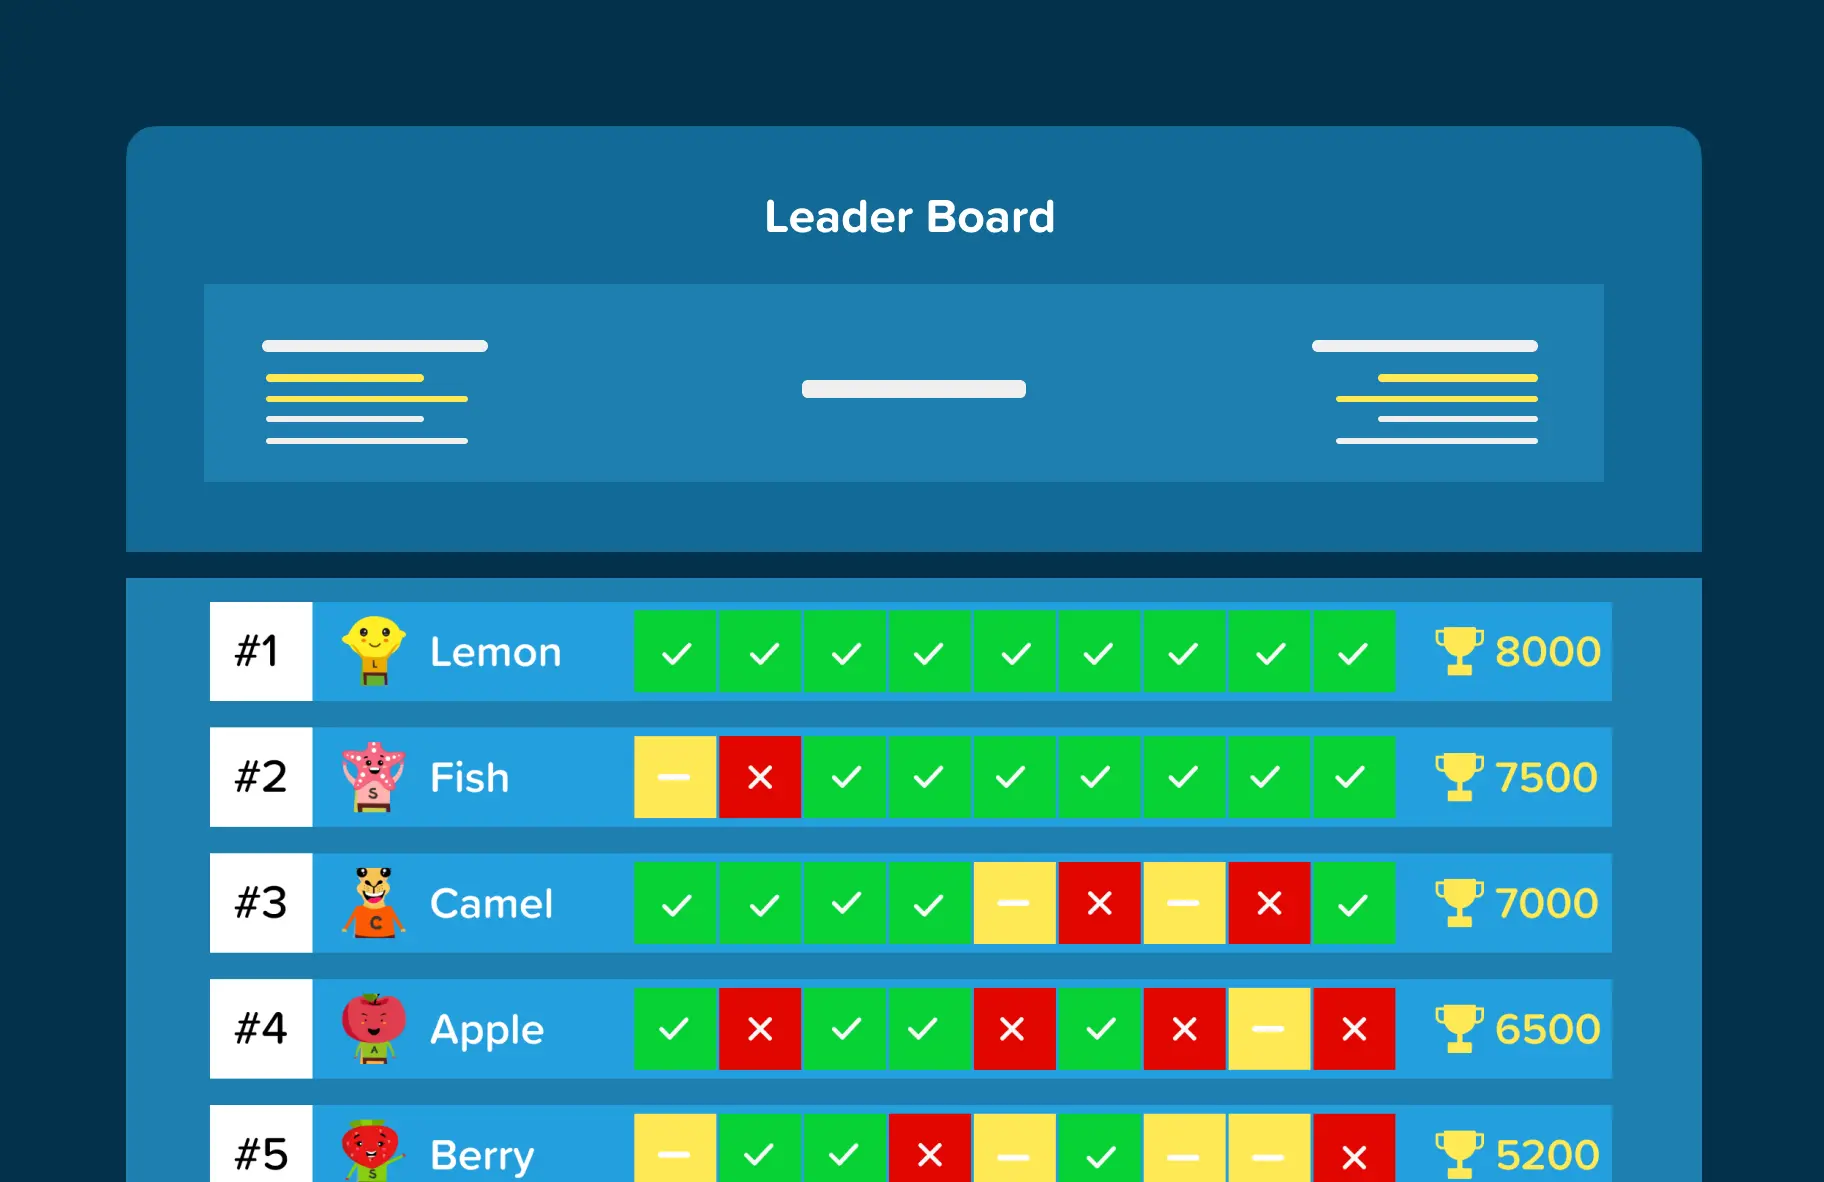 A leaderboard displaying the scores and analytics of particiants playing the Interactive choice mode Jeopardy game.